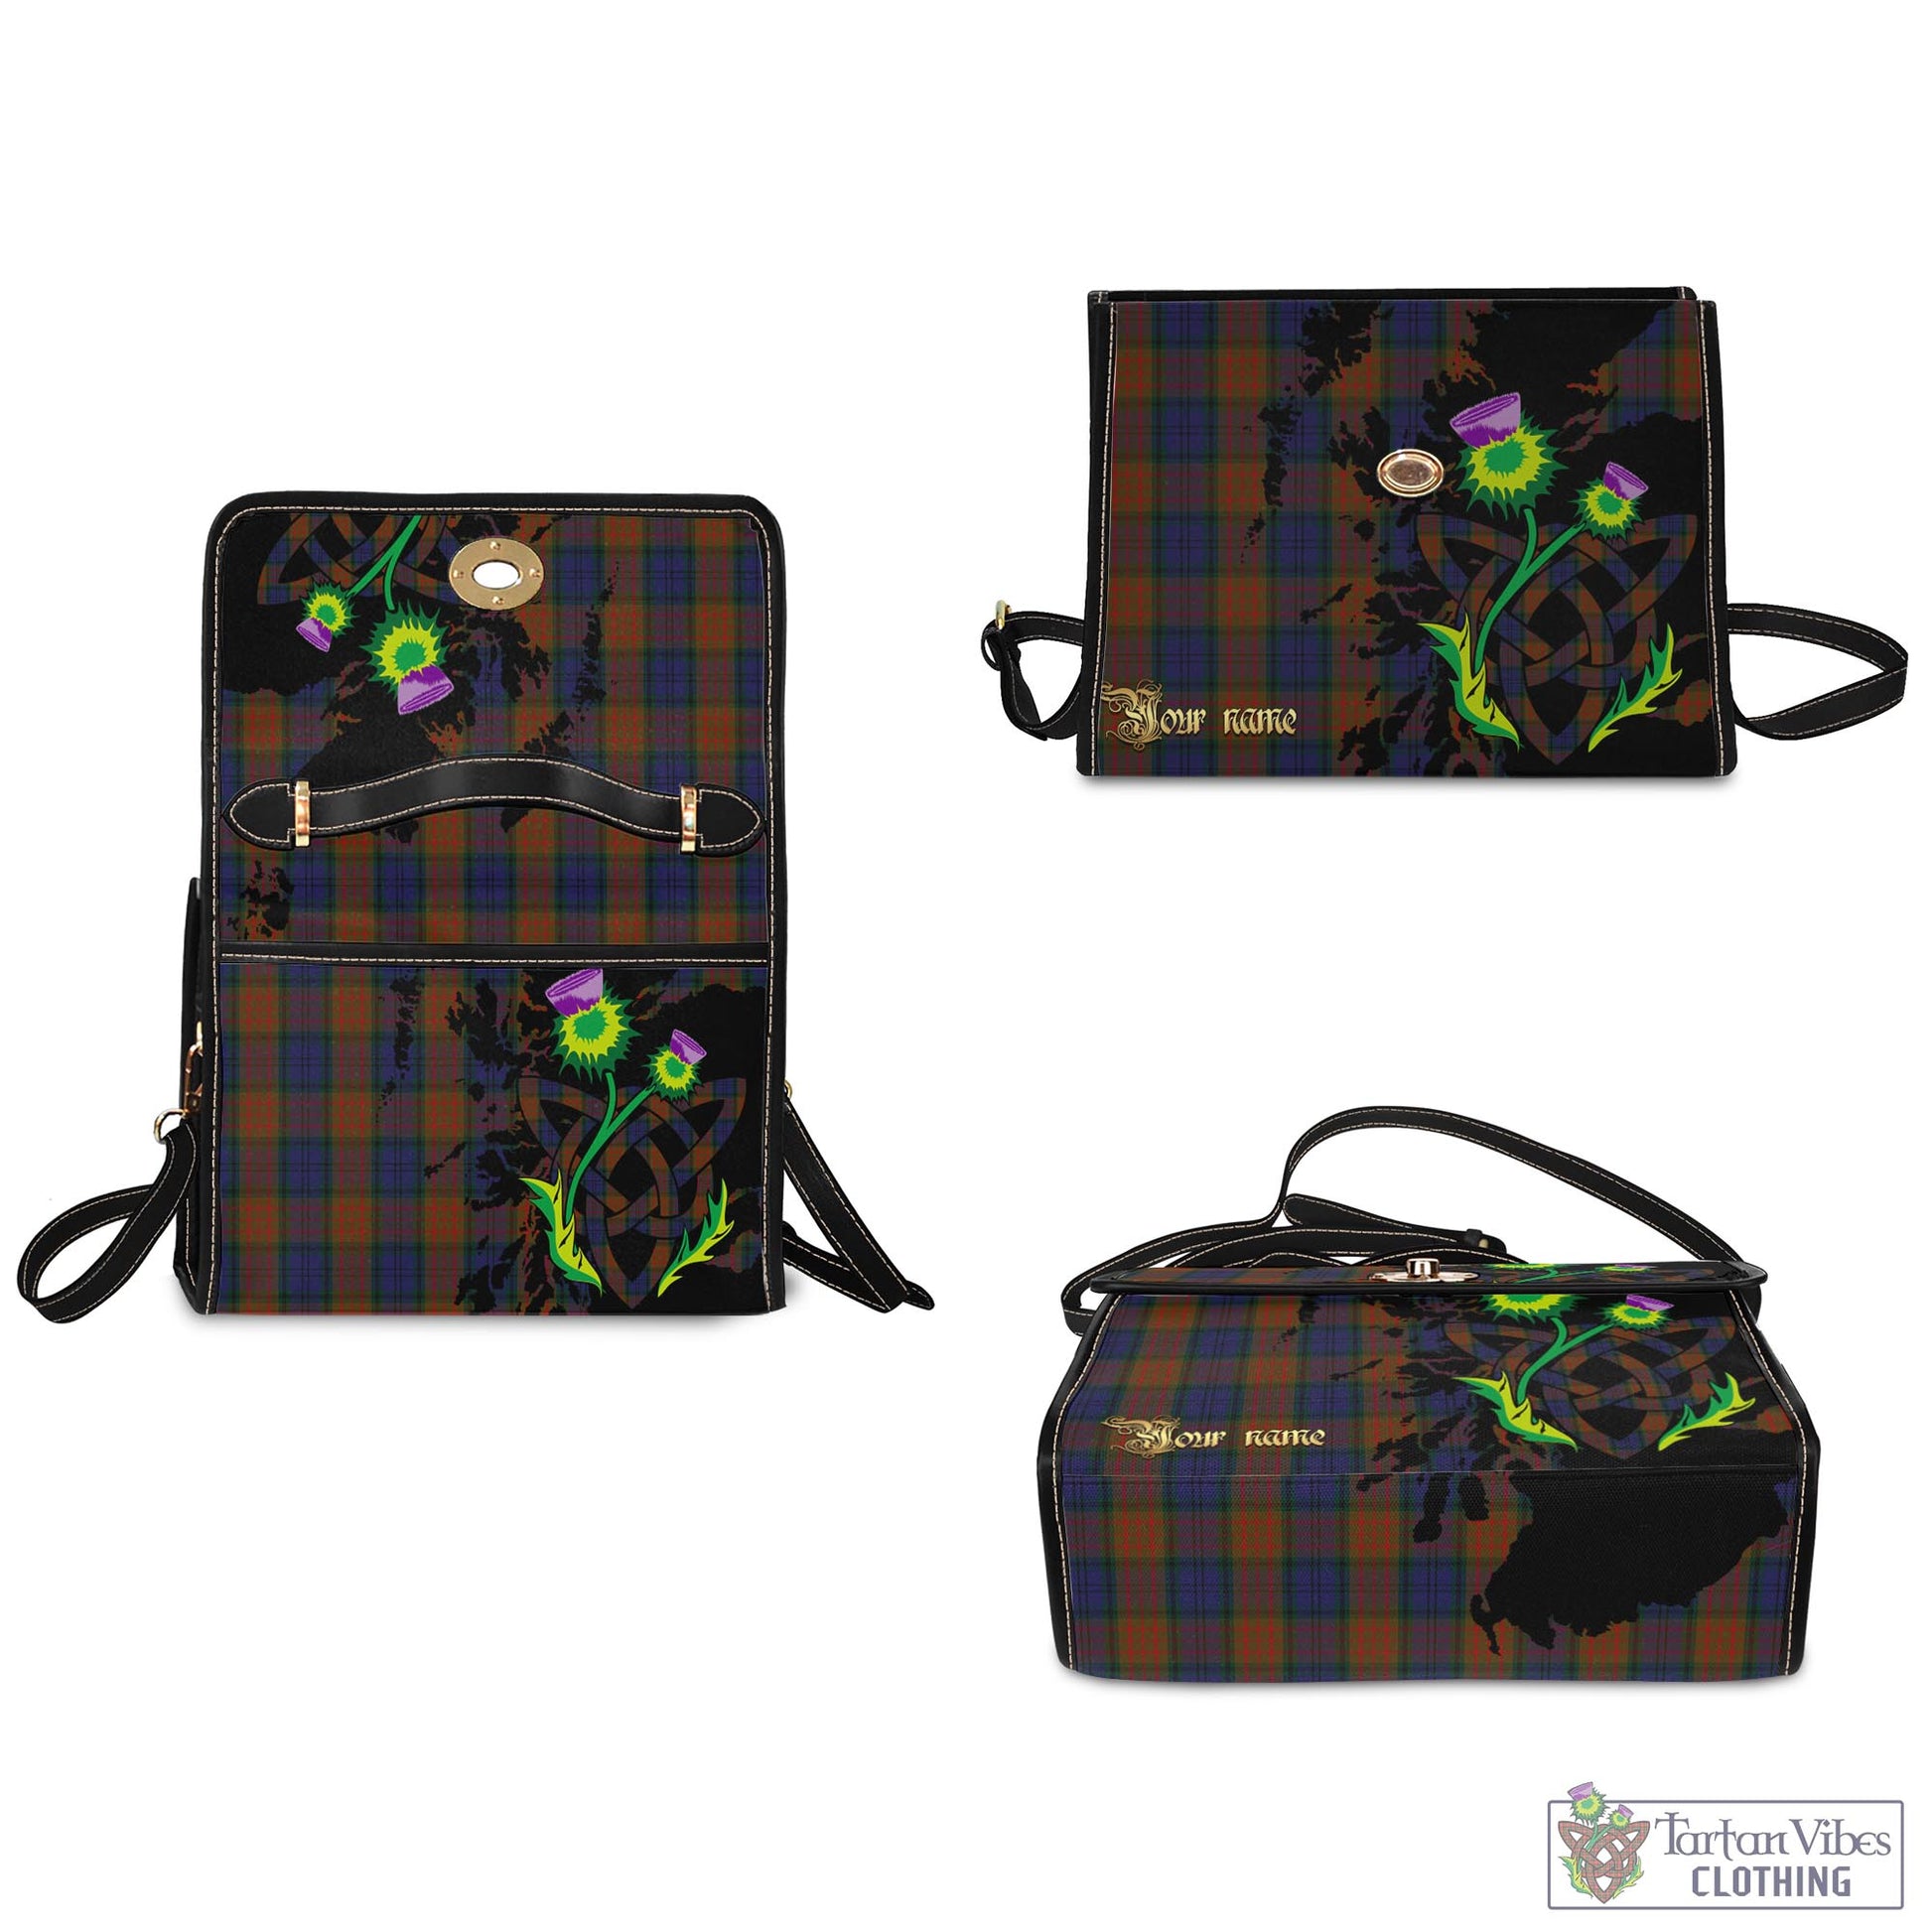 Tartan Vibes Clothing Longford County Ireland Tartan Waterproof Canvas Bag with Scotland Map and Thistle Celtic Accents